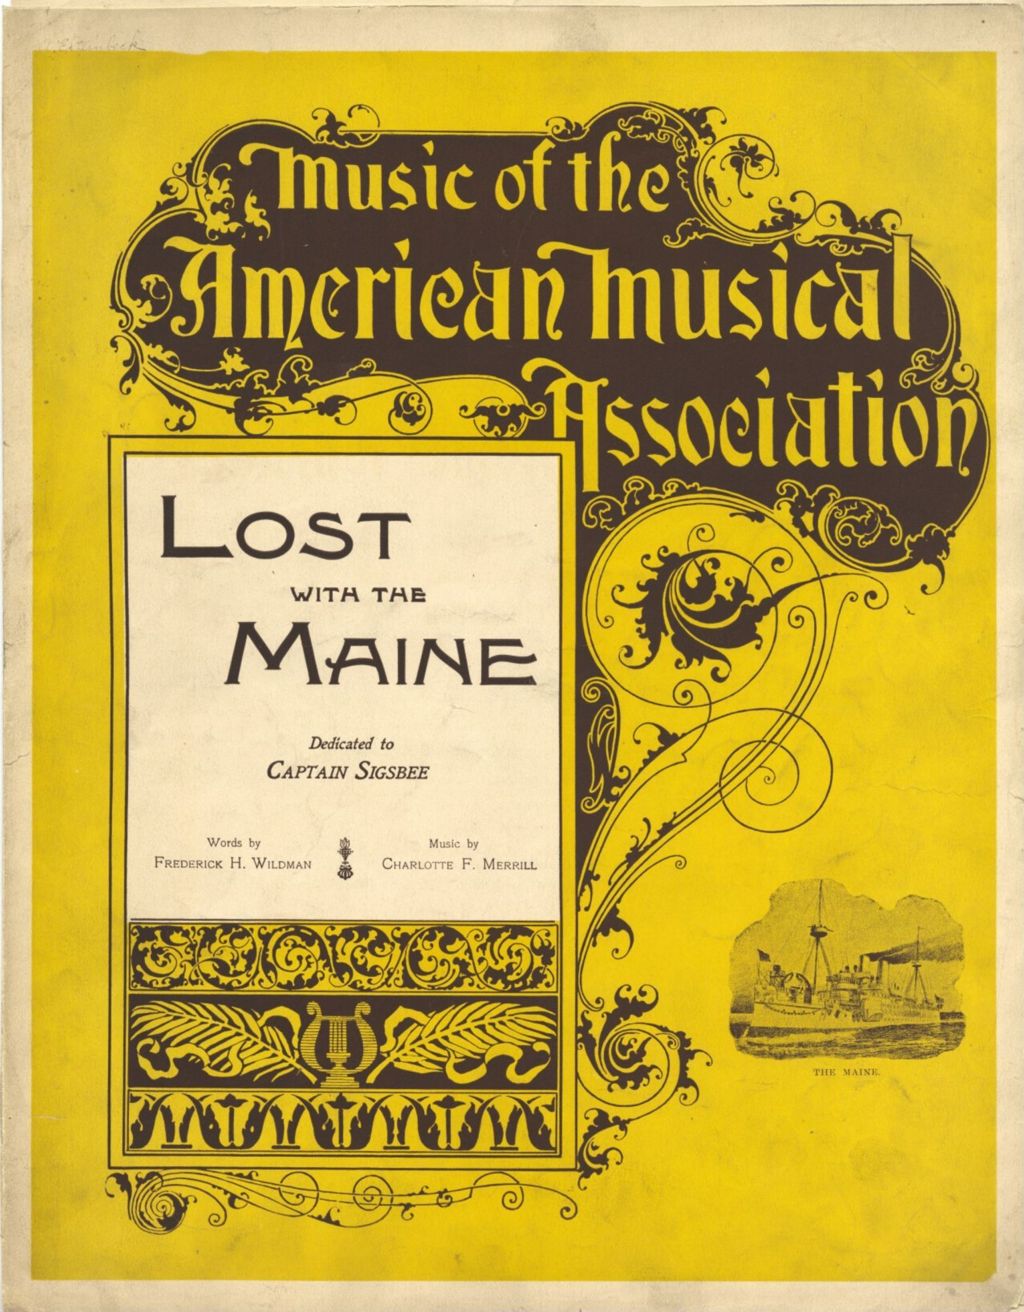 Miniature of Lost with the Maine